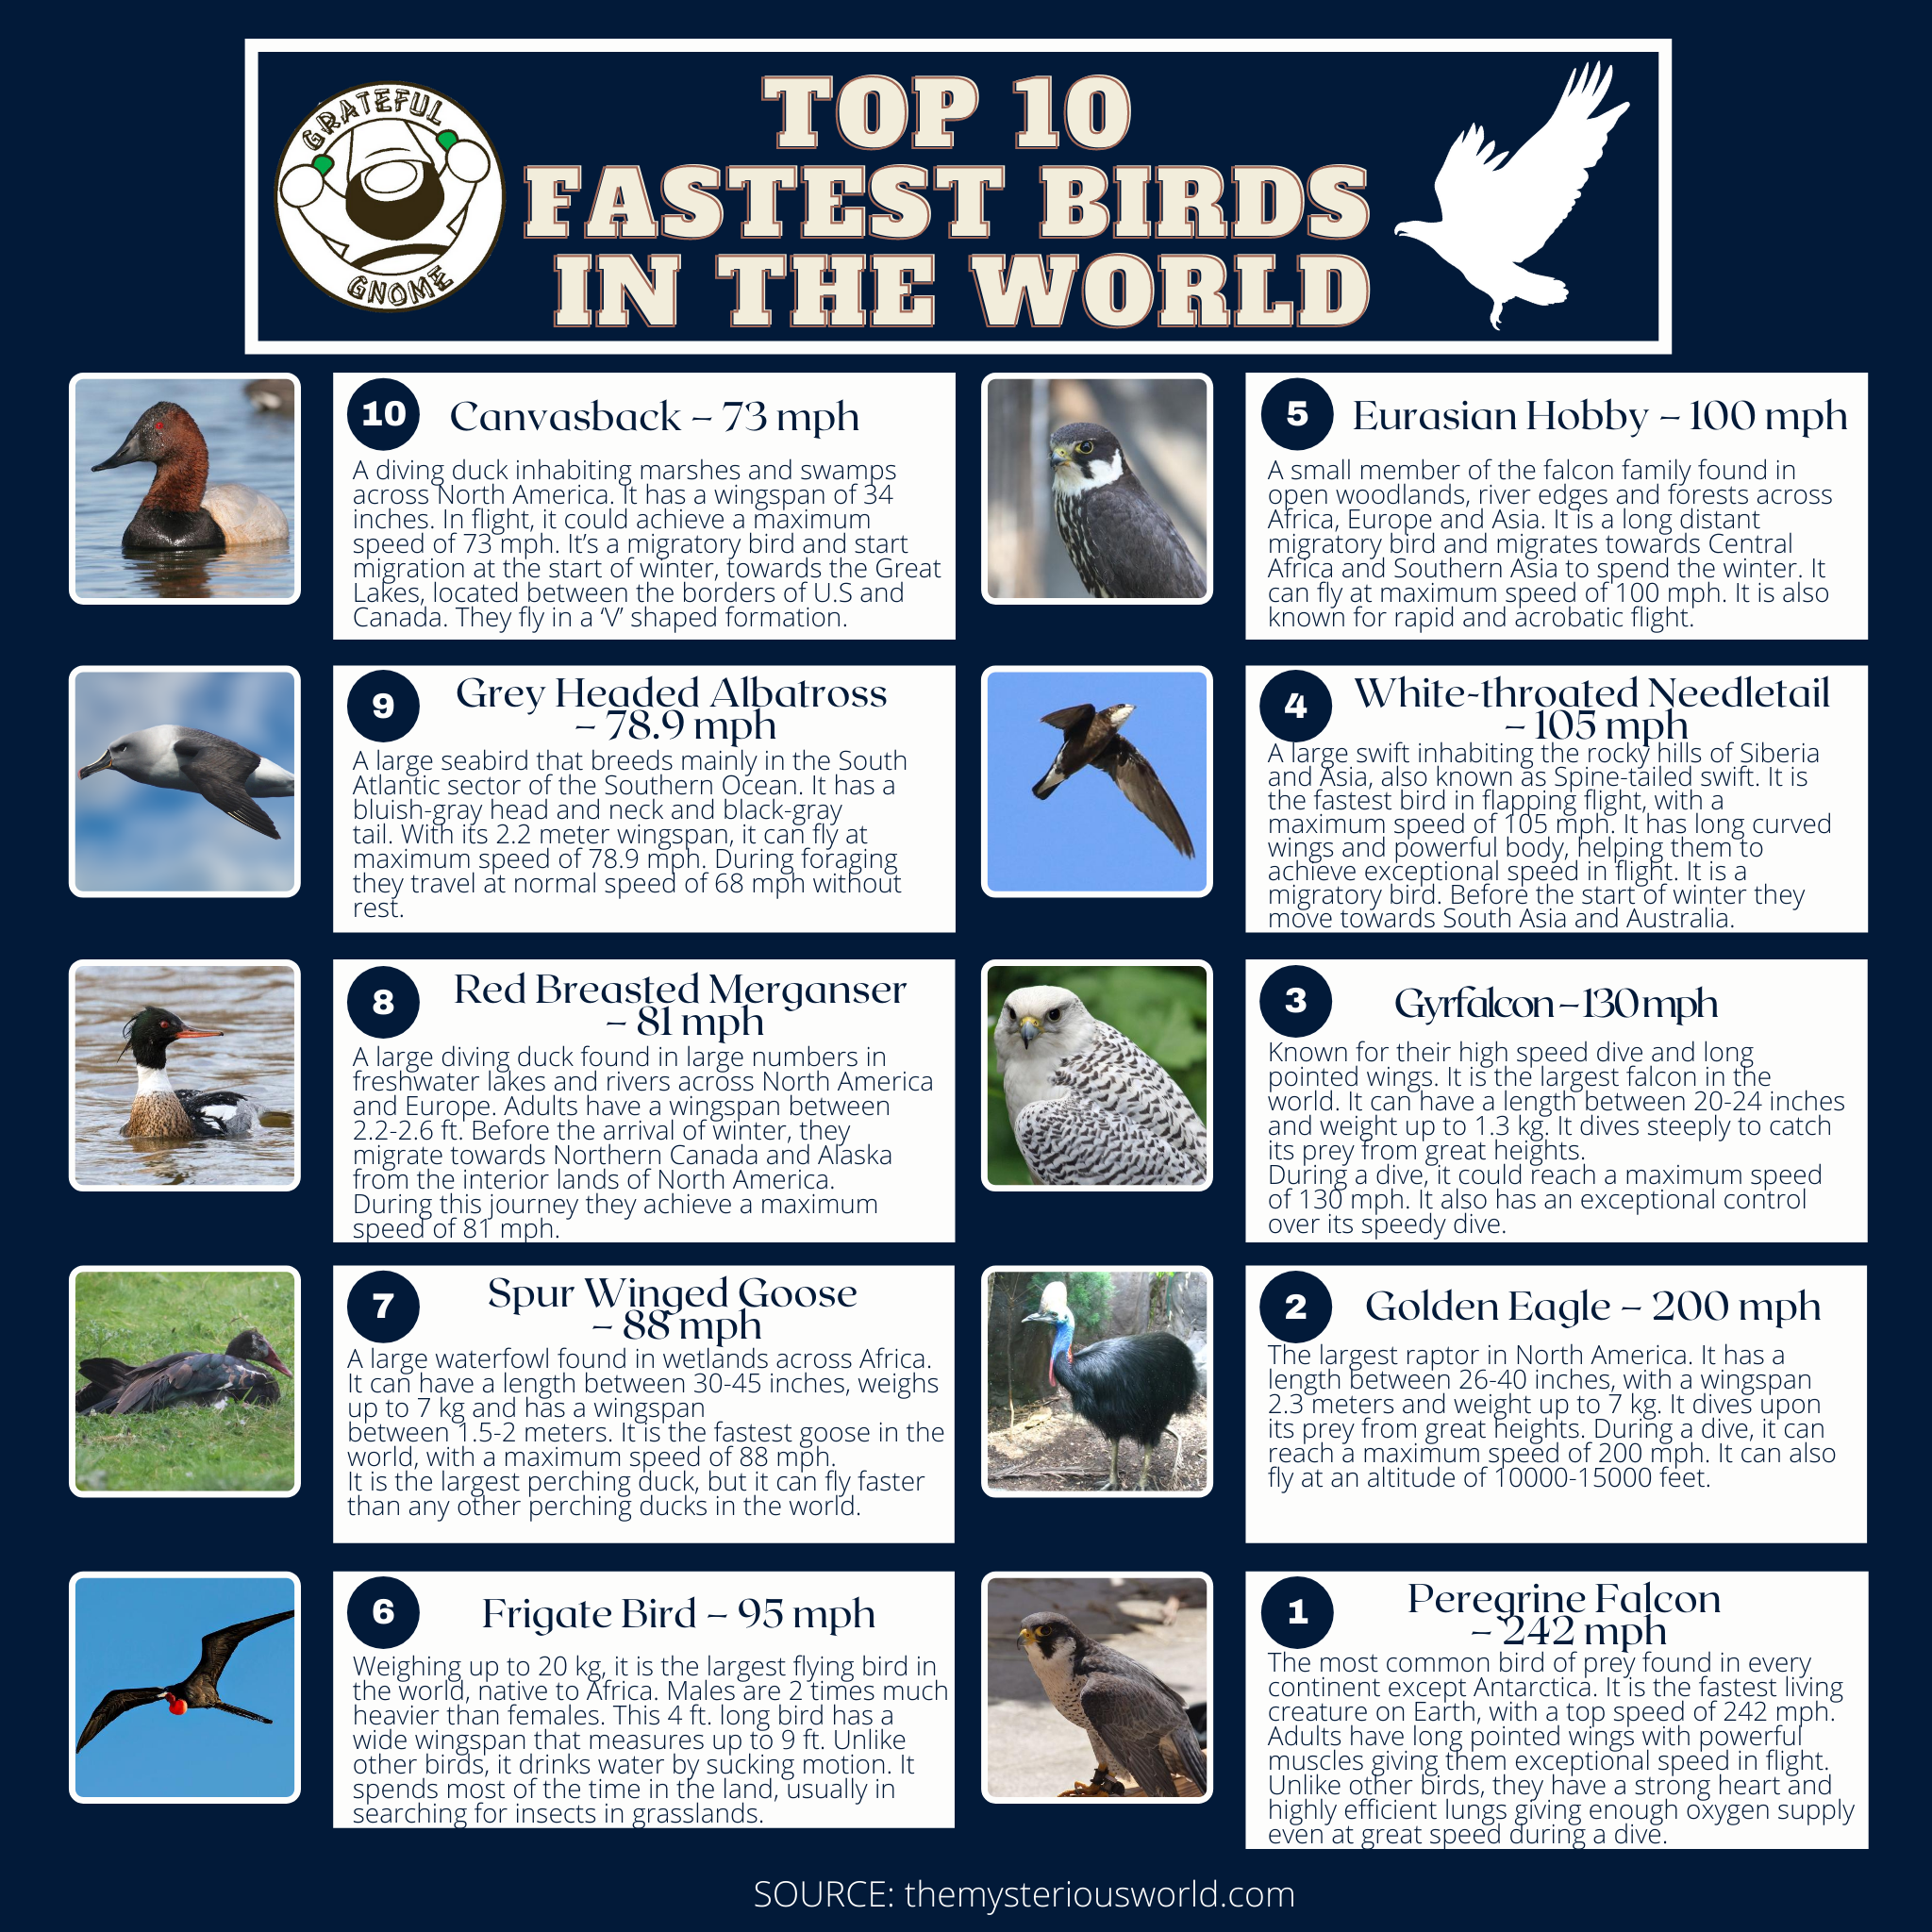 What is the top 10 fastest birds?